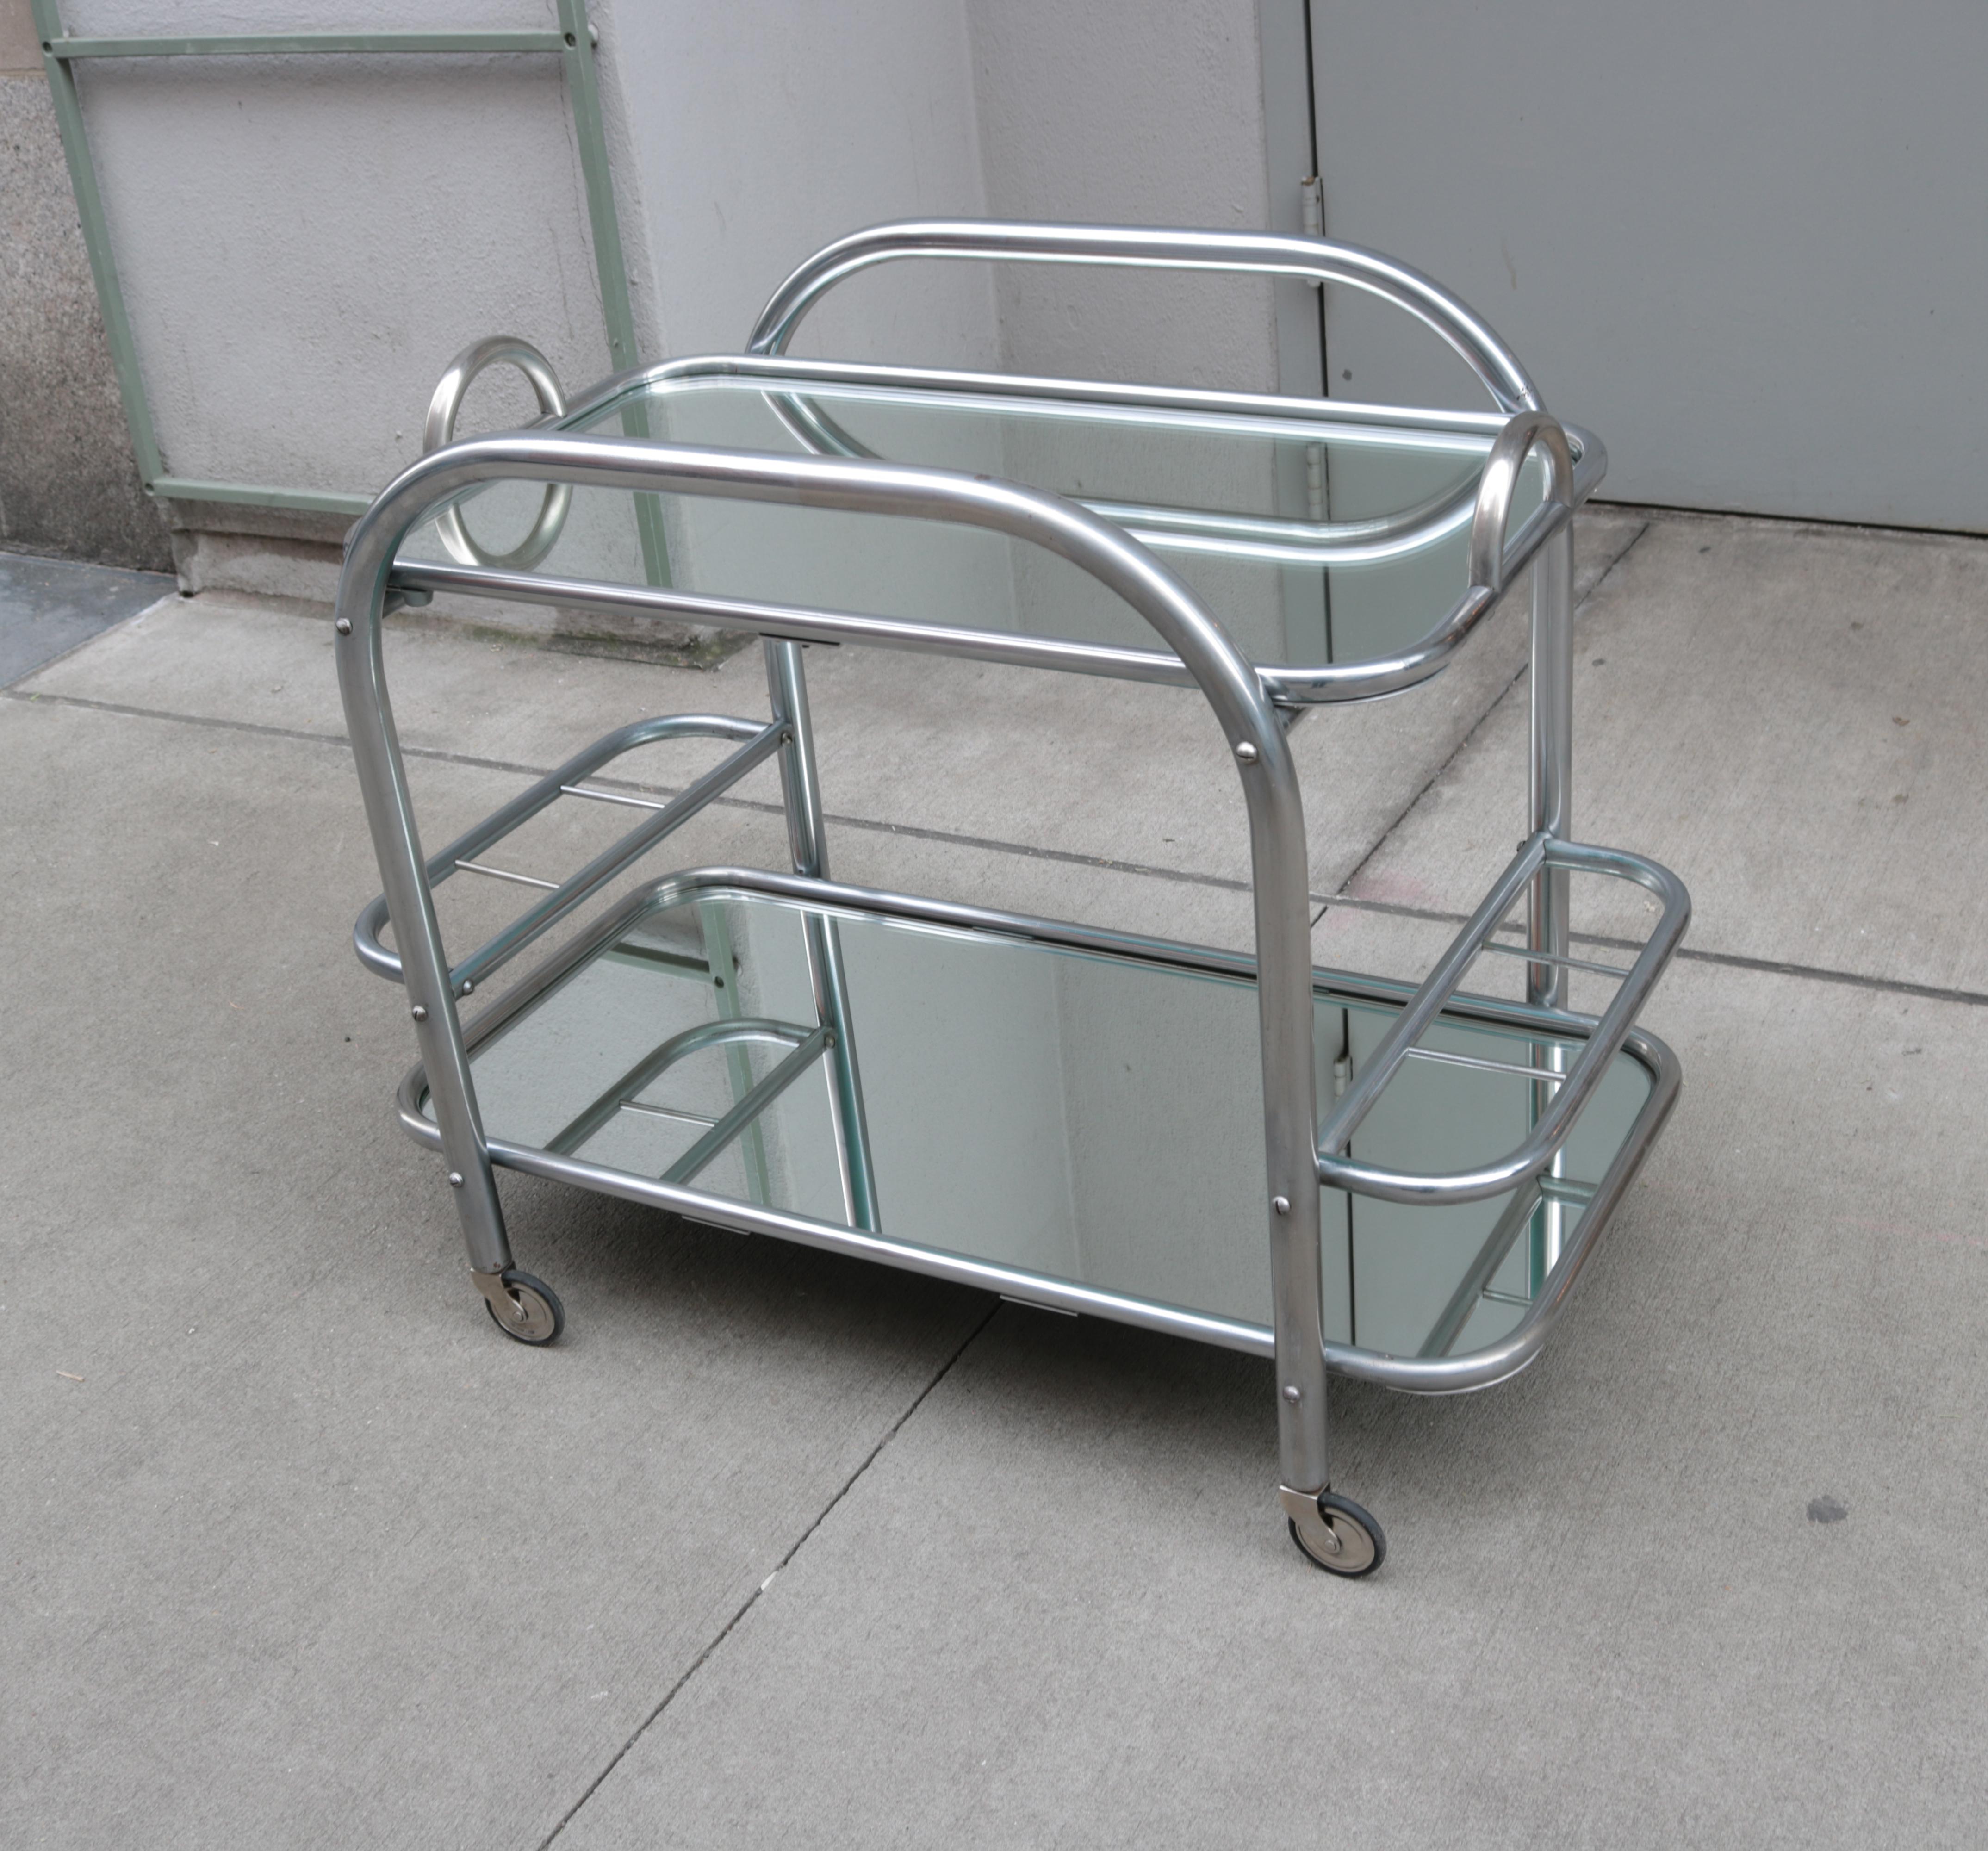 Art Deco Bar Cart With Removable Tray.
Nickeled metal with mirrored surfaces.